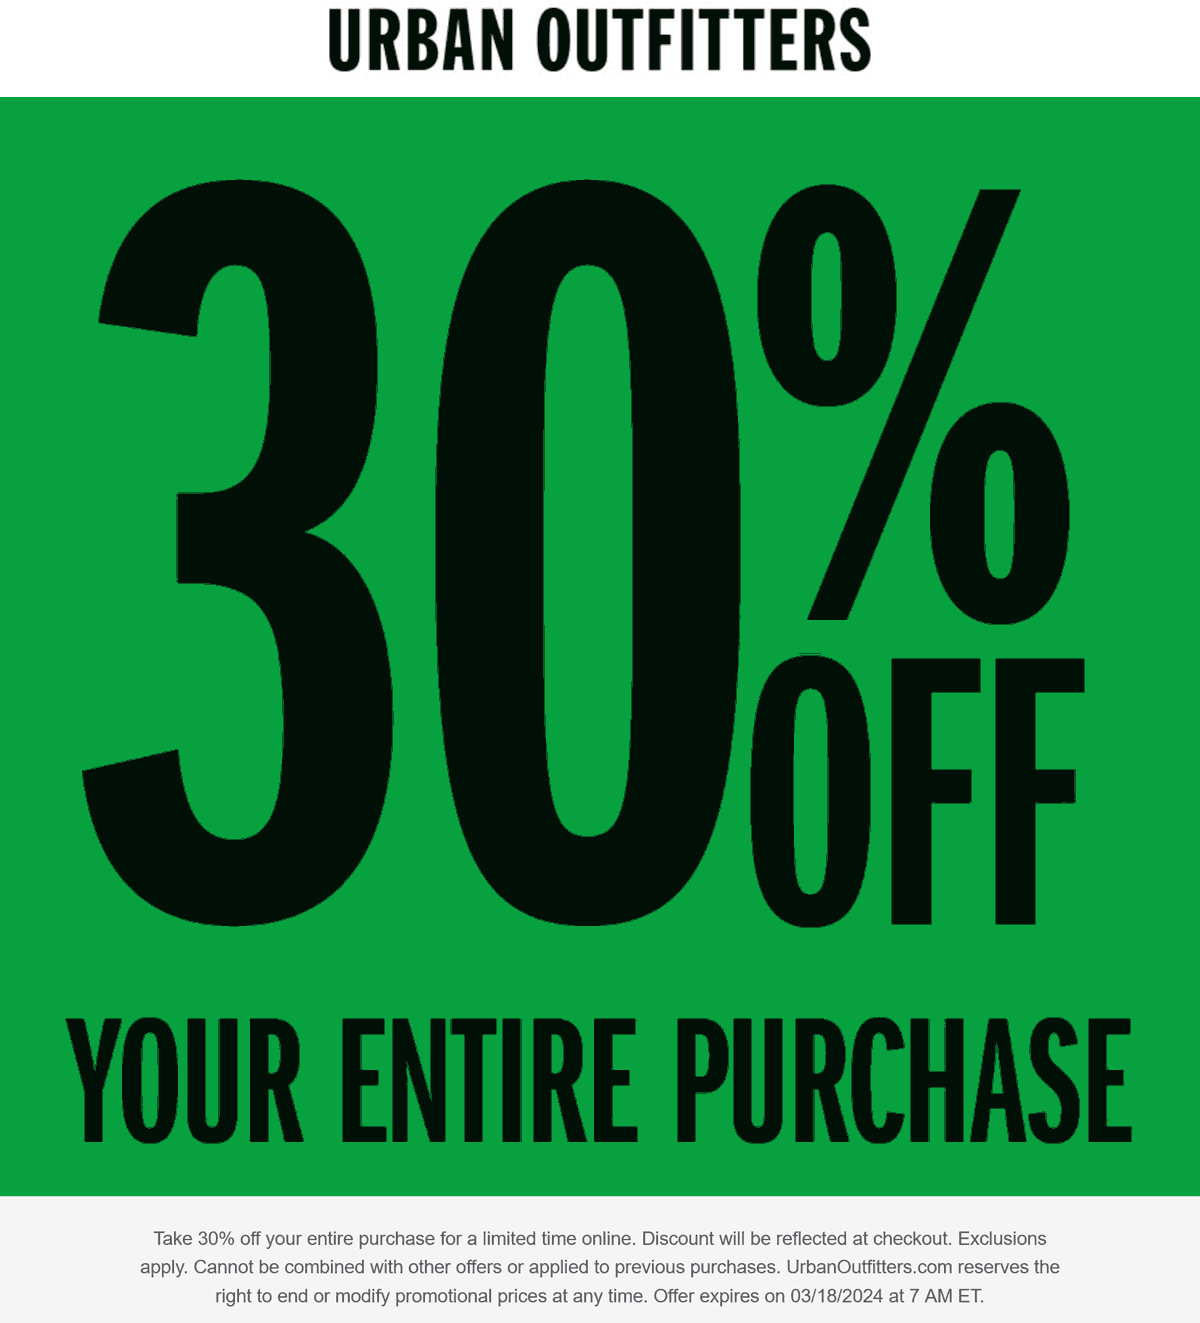 Urban Outfitters stores Coupon  30% off everything today at Urban Outfitters #urbanoutfitters 